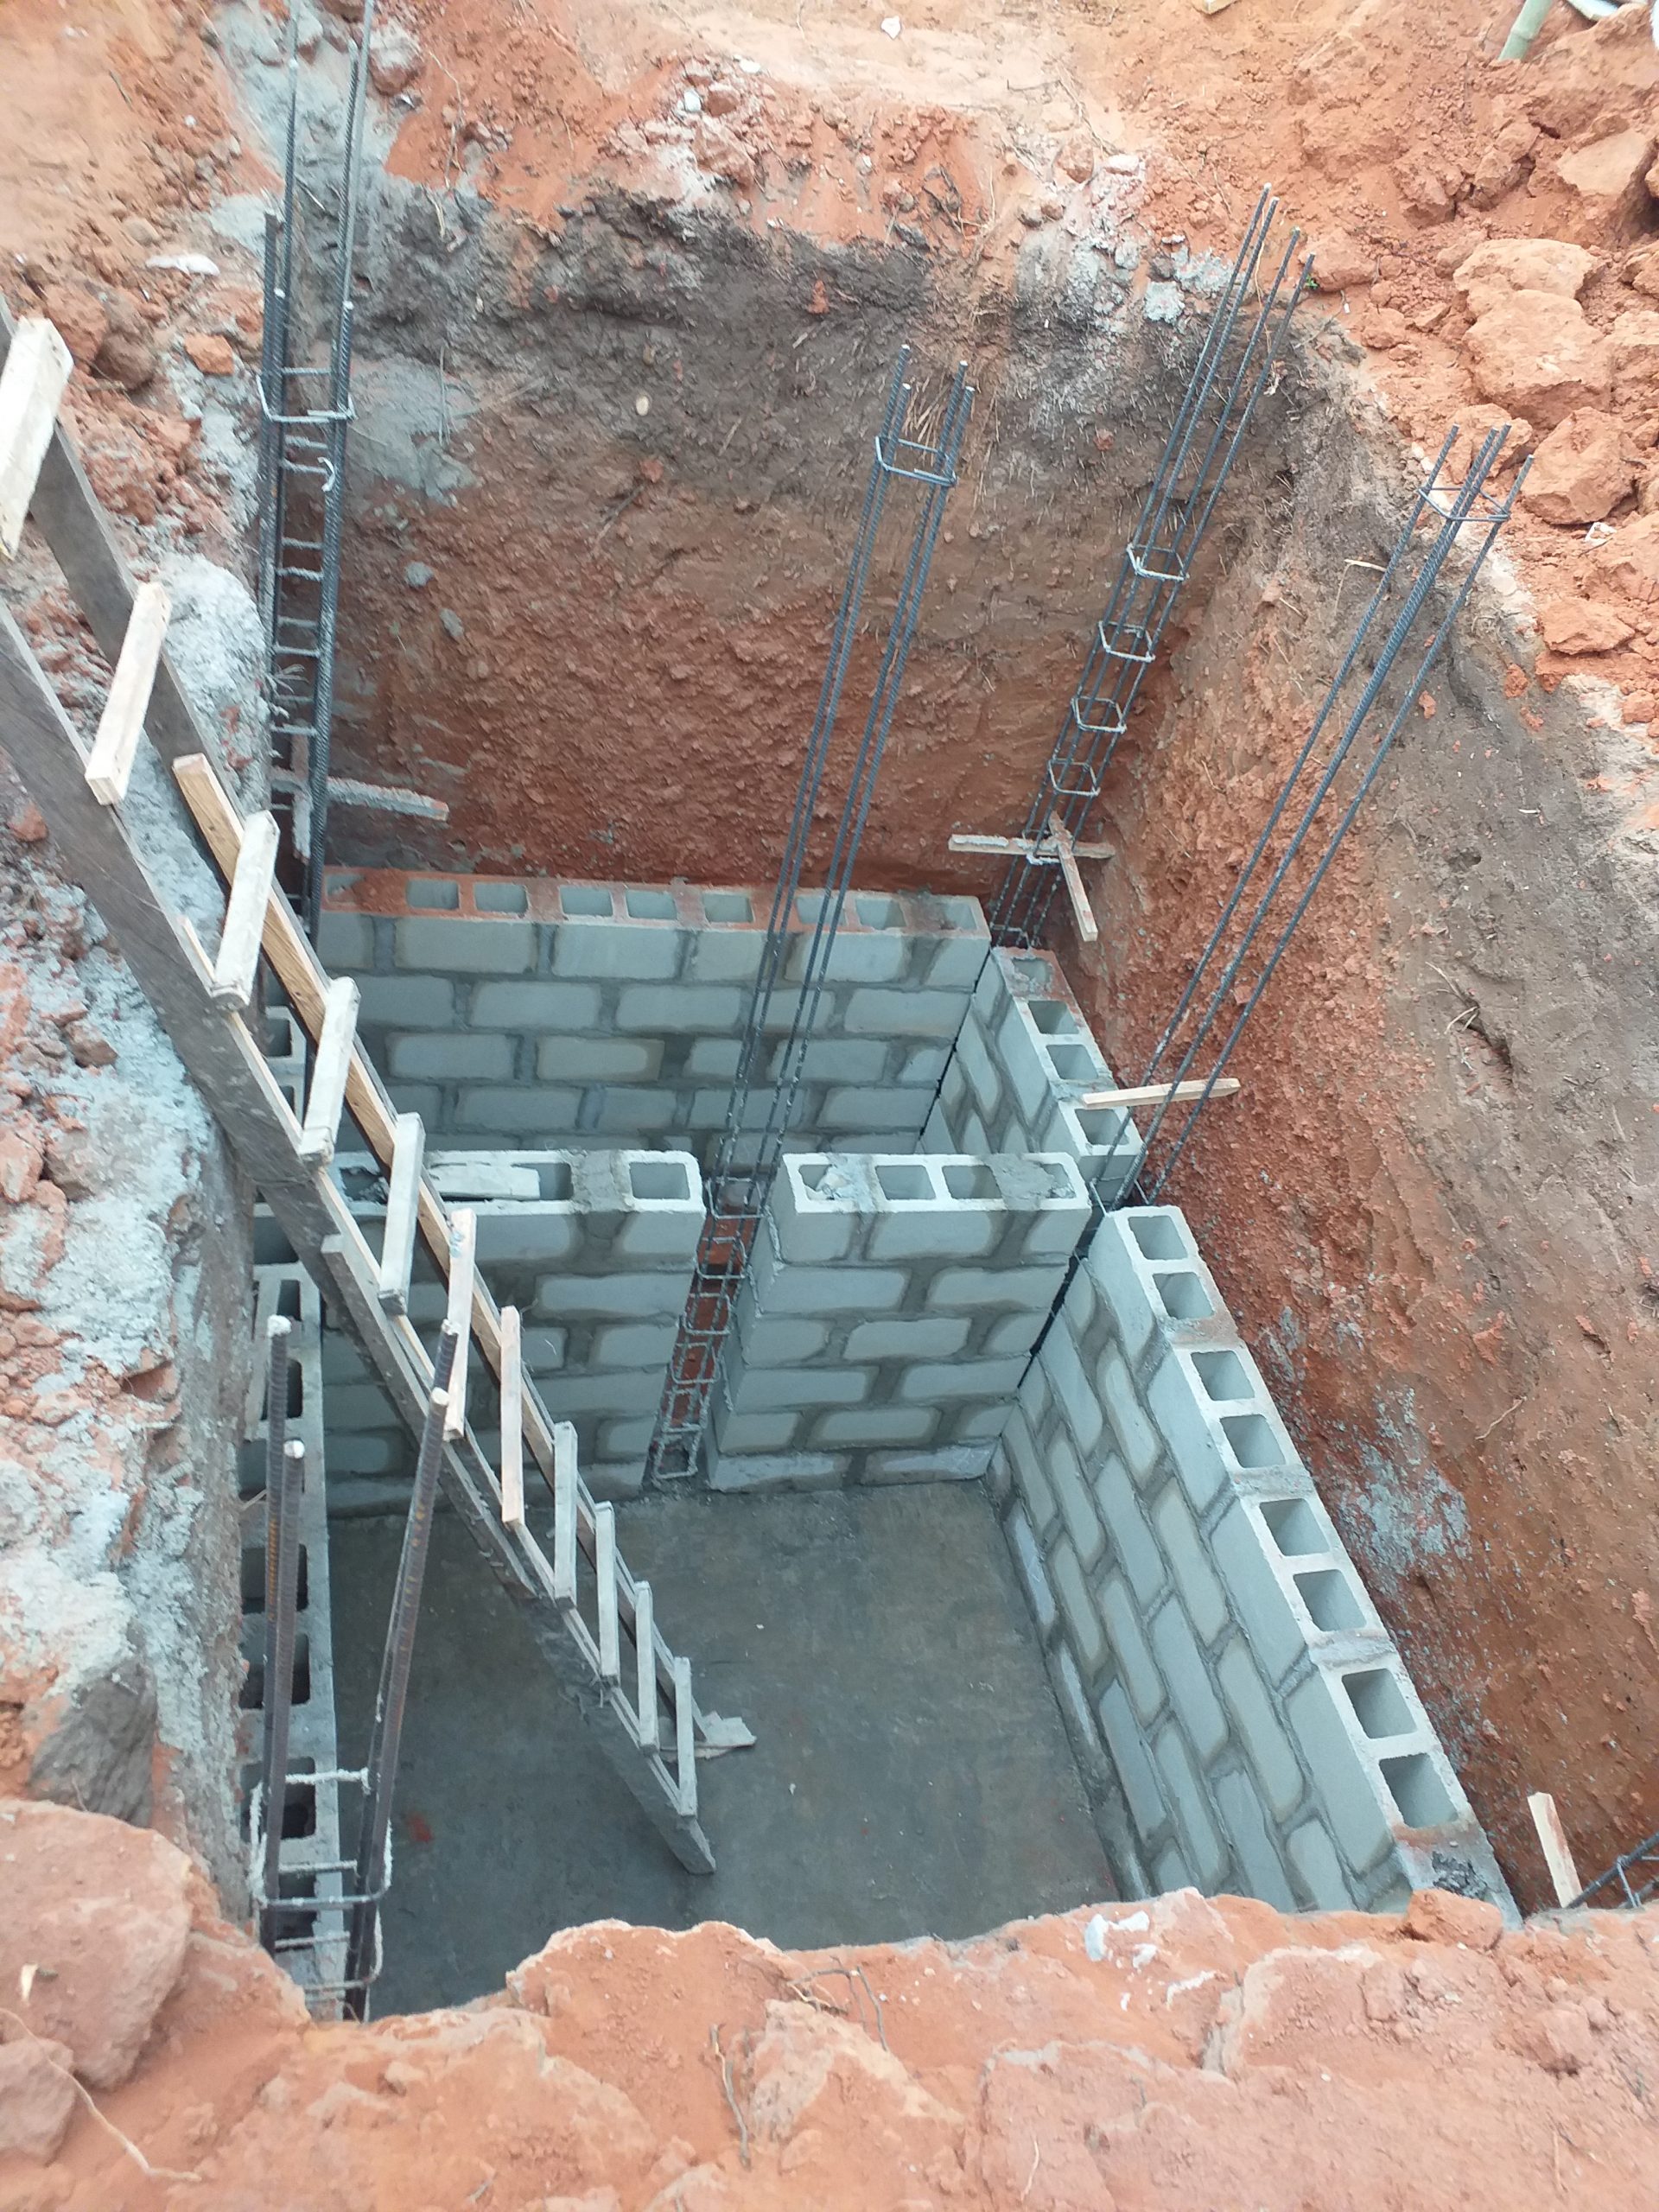 Soak-away and Septic-tank Construction for a private residence – BAM